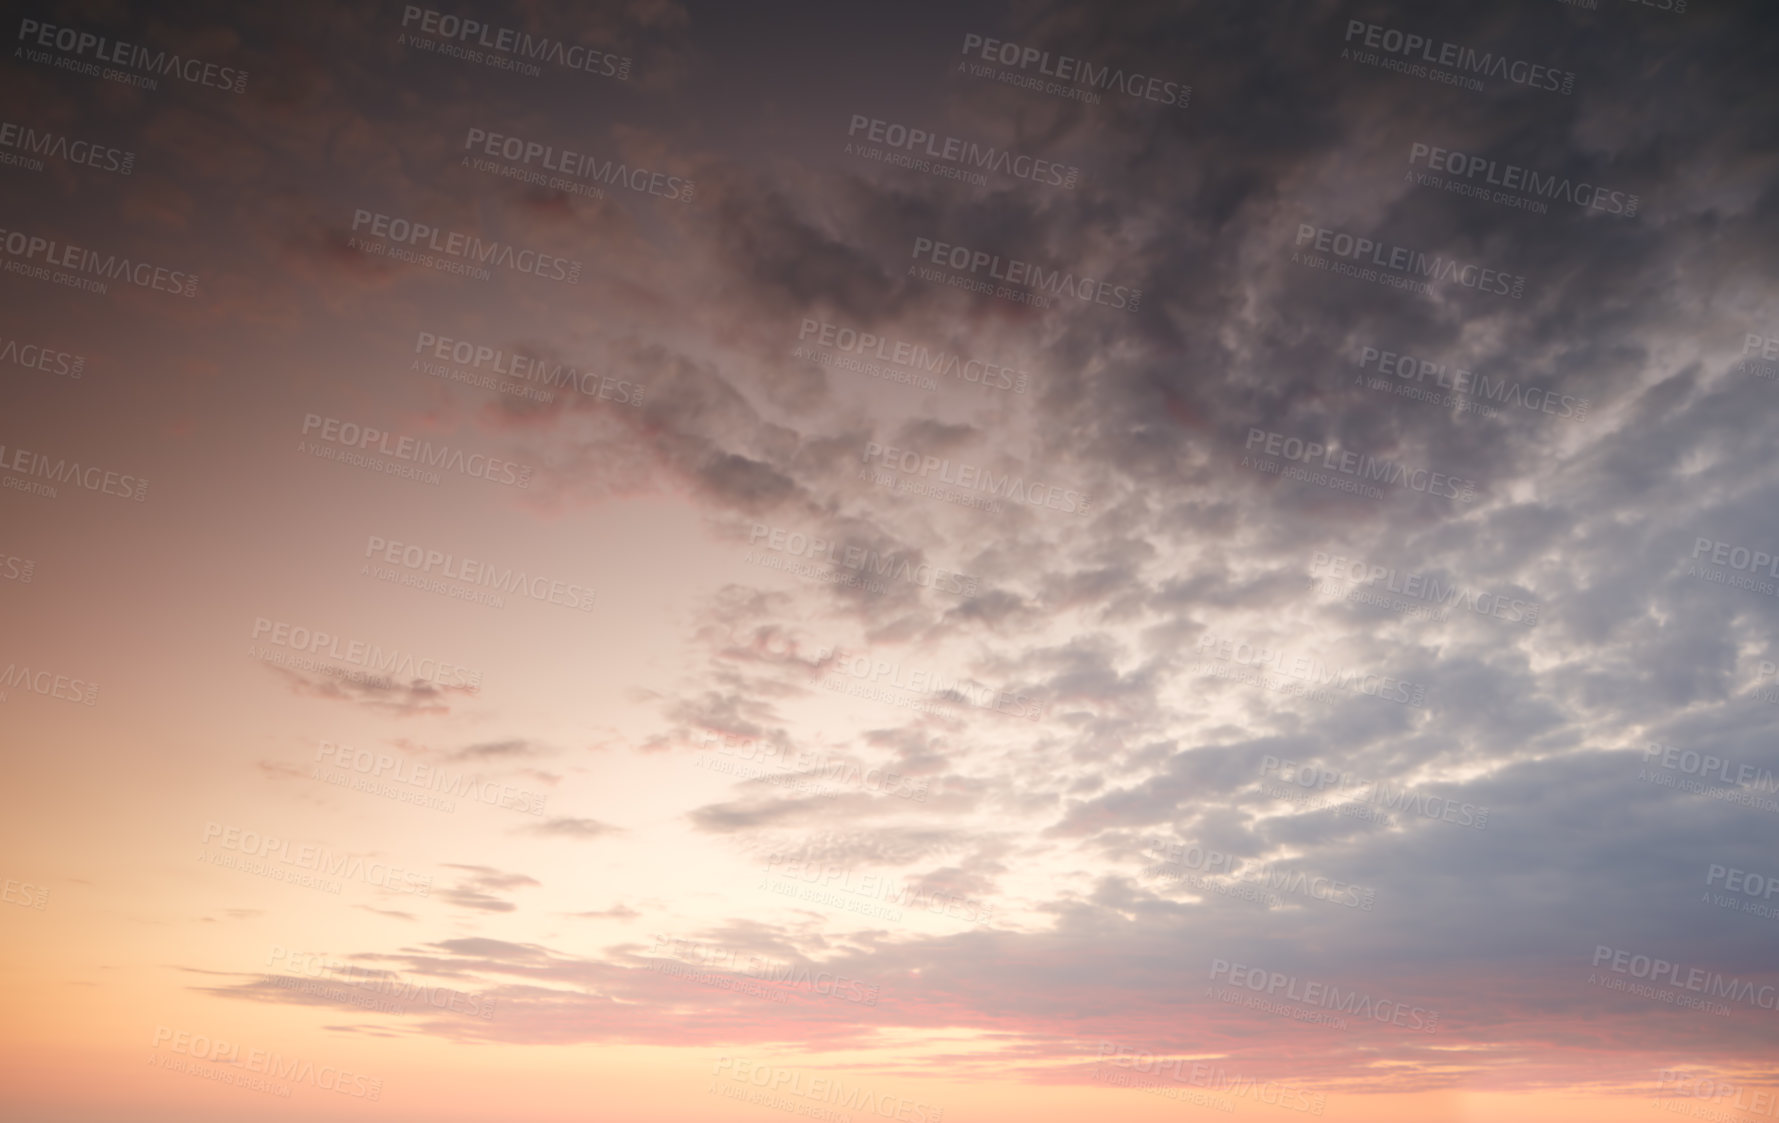 Buy stock photo Dark clouds in a sunset sky background with copy space. Cloudscape climate view of dramatic sky with signs of thunder storm on the horizon. Landscape of the sun at dusk in autumn or winter weather